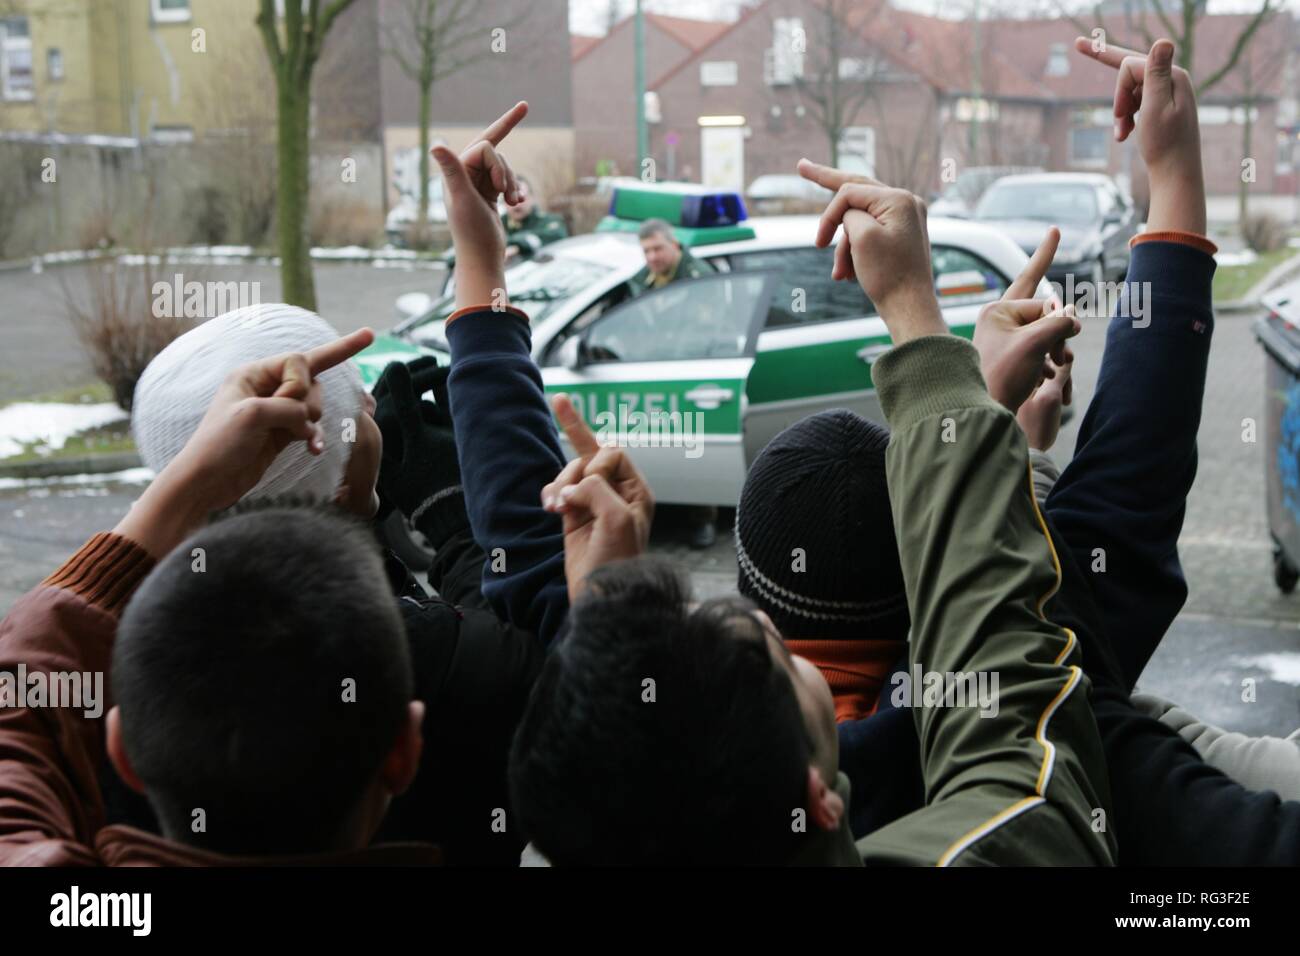 DEU, Germany : juvenile crime. Young man is arrested by the police. Young boys protesting against the police.(posed scene) Stock Photo